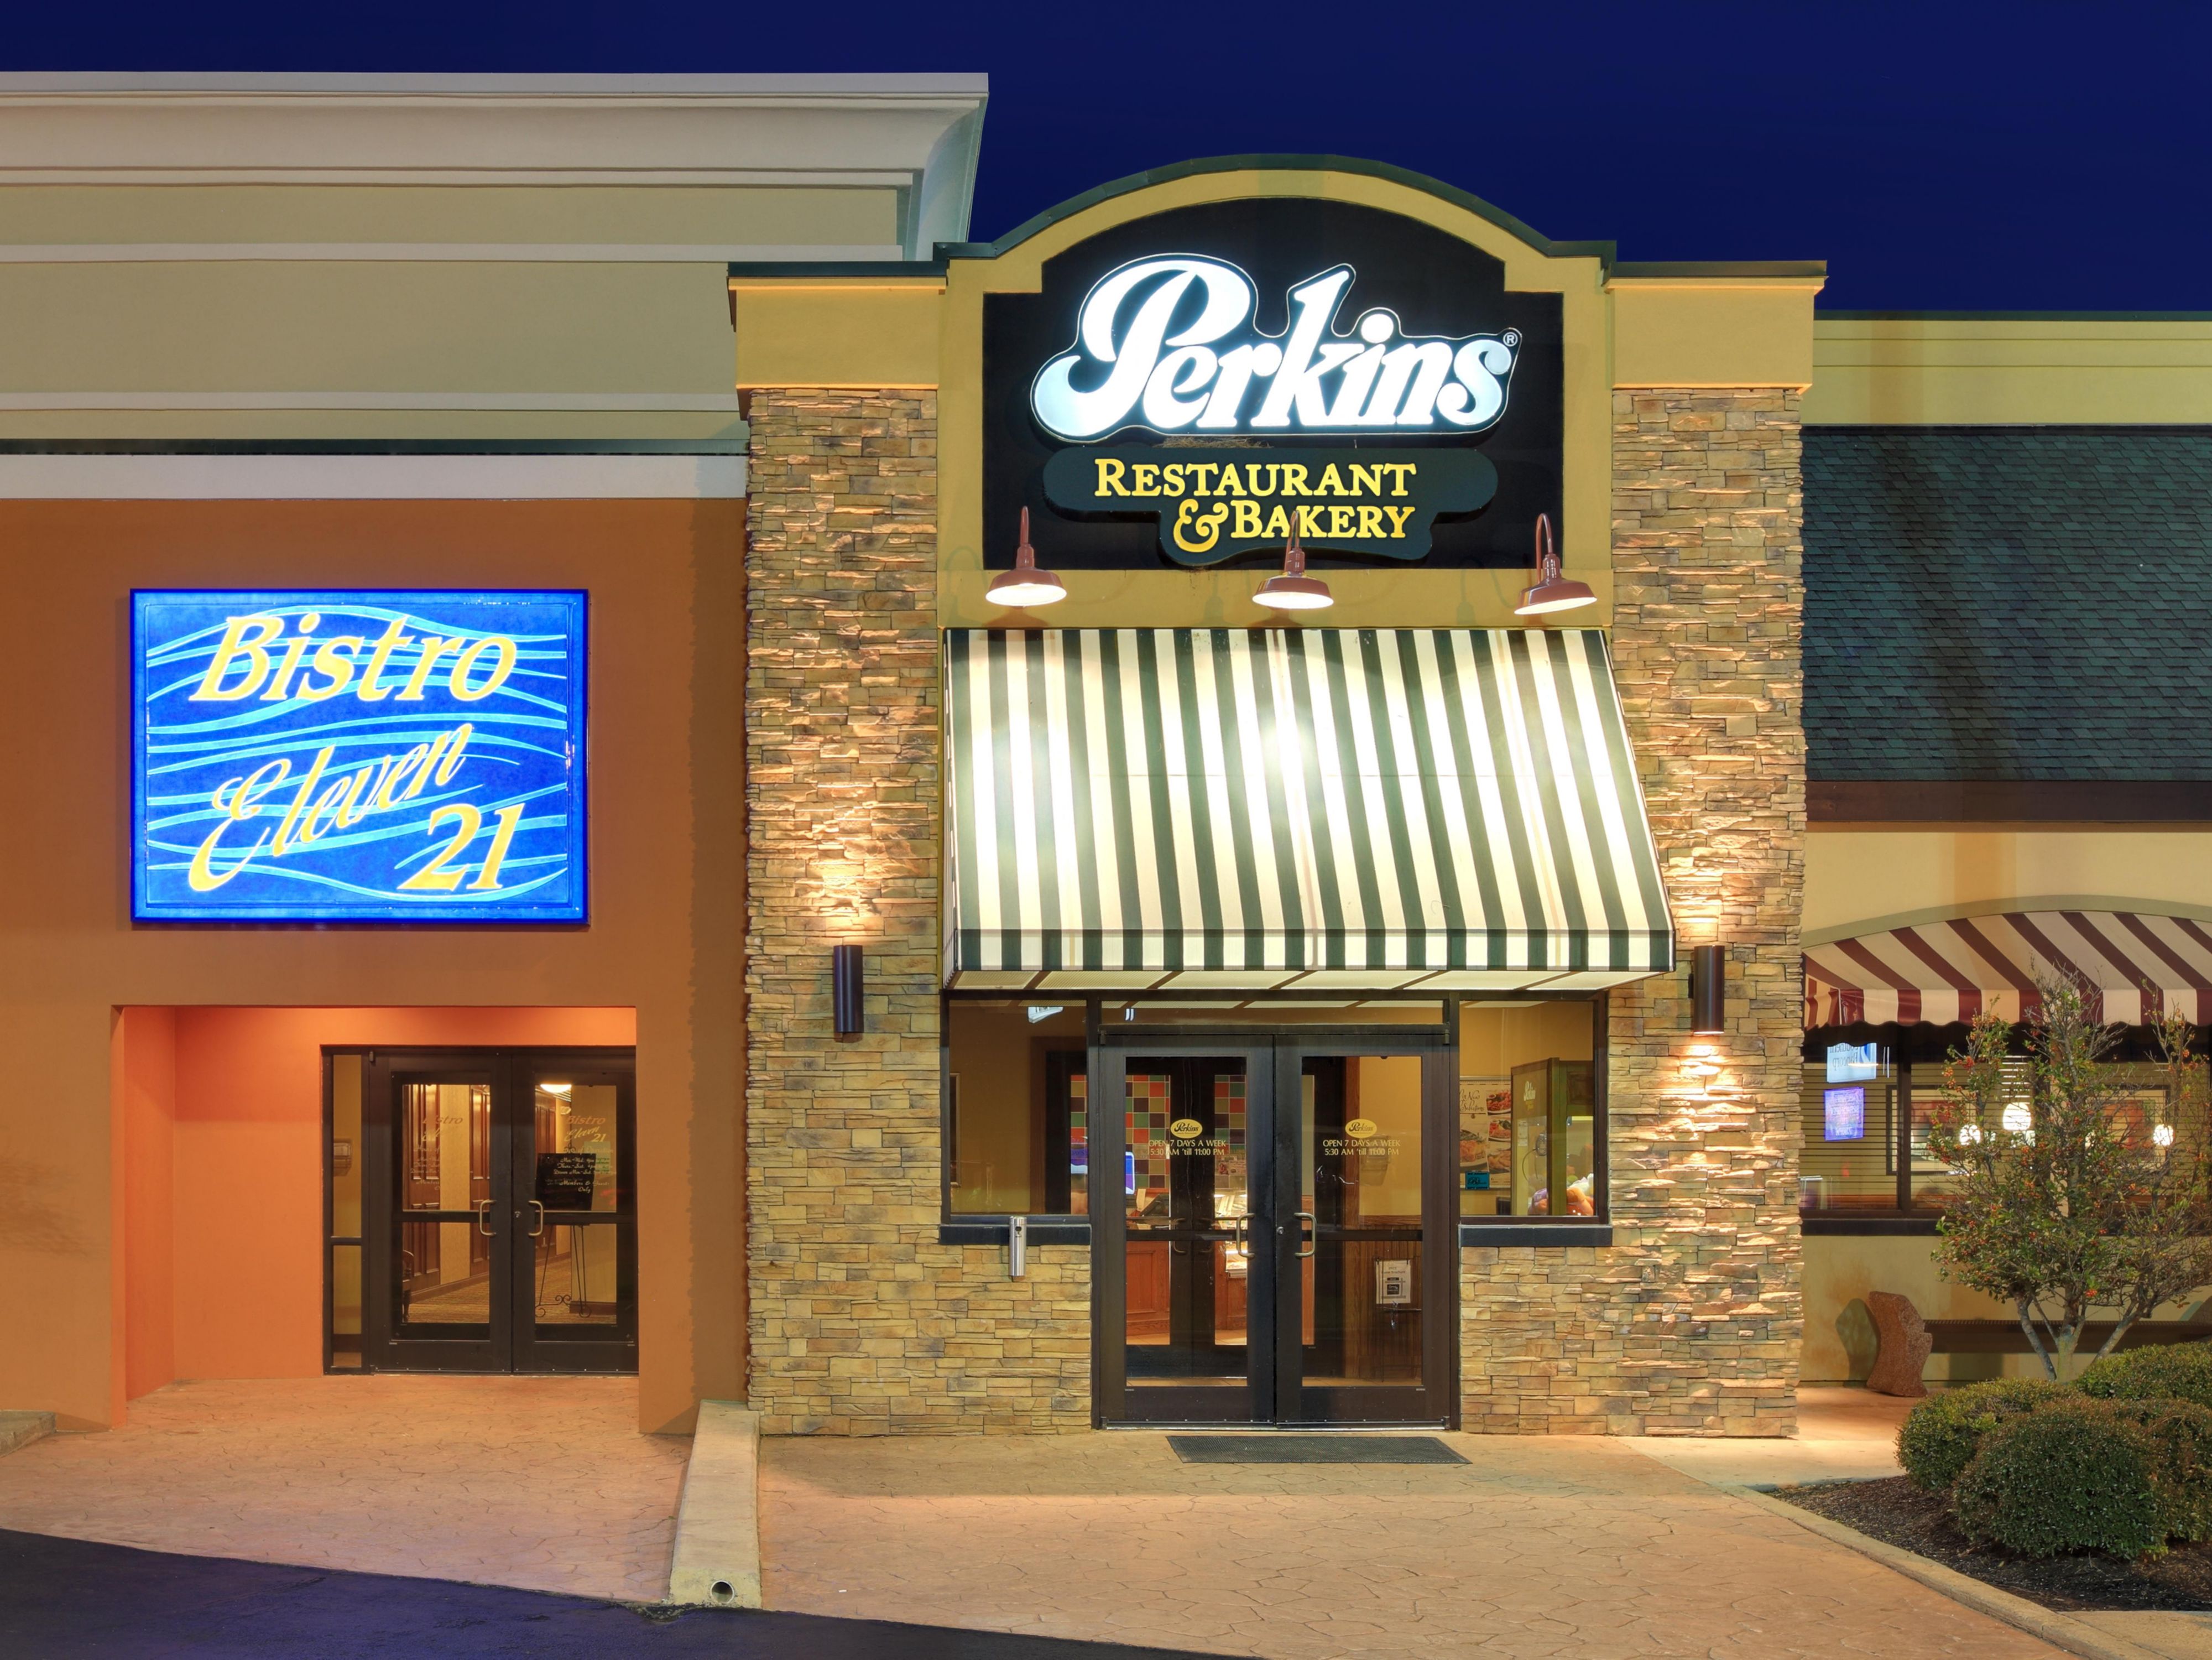 Perkins Family Restaurant and Bakery
Specializes in Pastries and Desserts and Family Dining. Kids Eat Free Menu. Breakfast served all day. Full sandwich and dinner menu. Holiday Hours vary please check